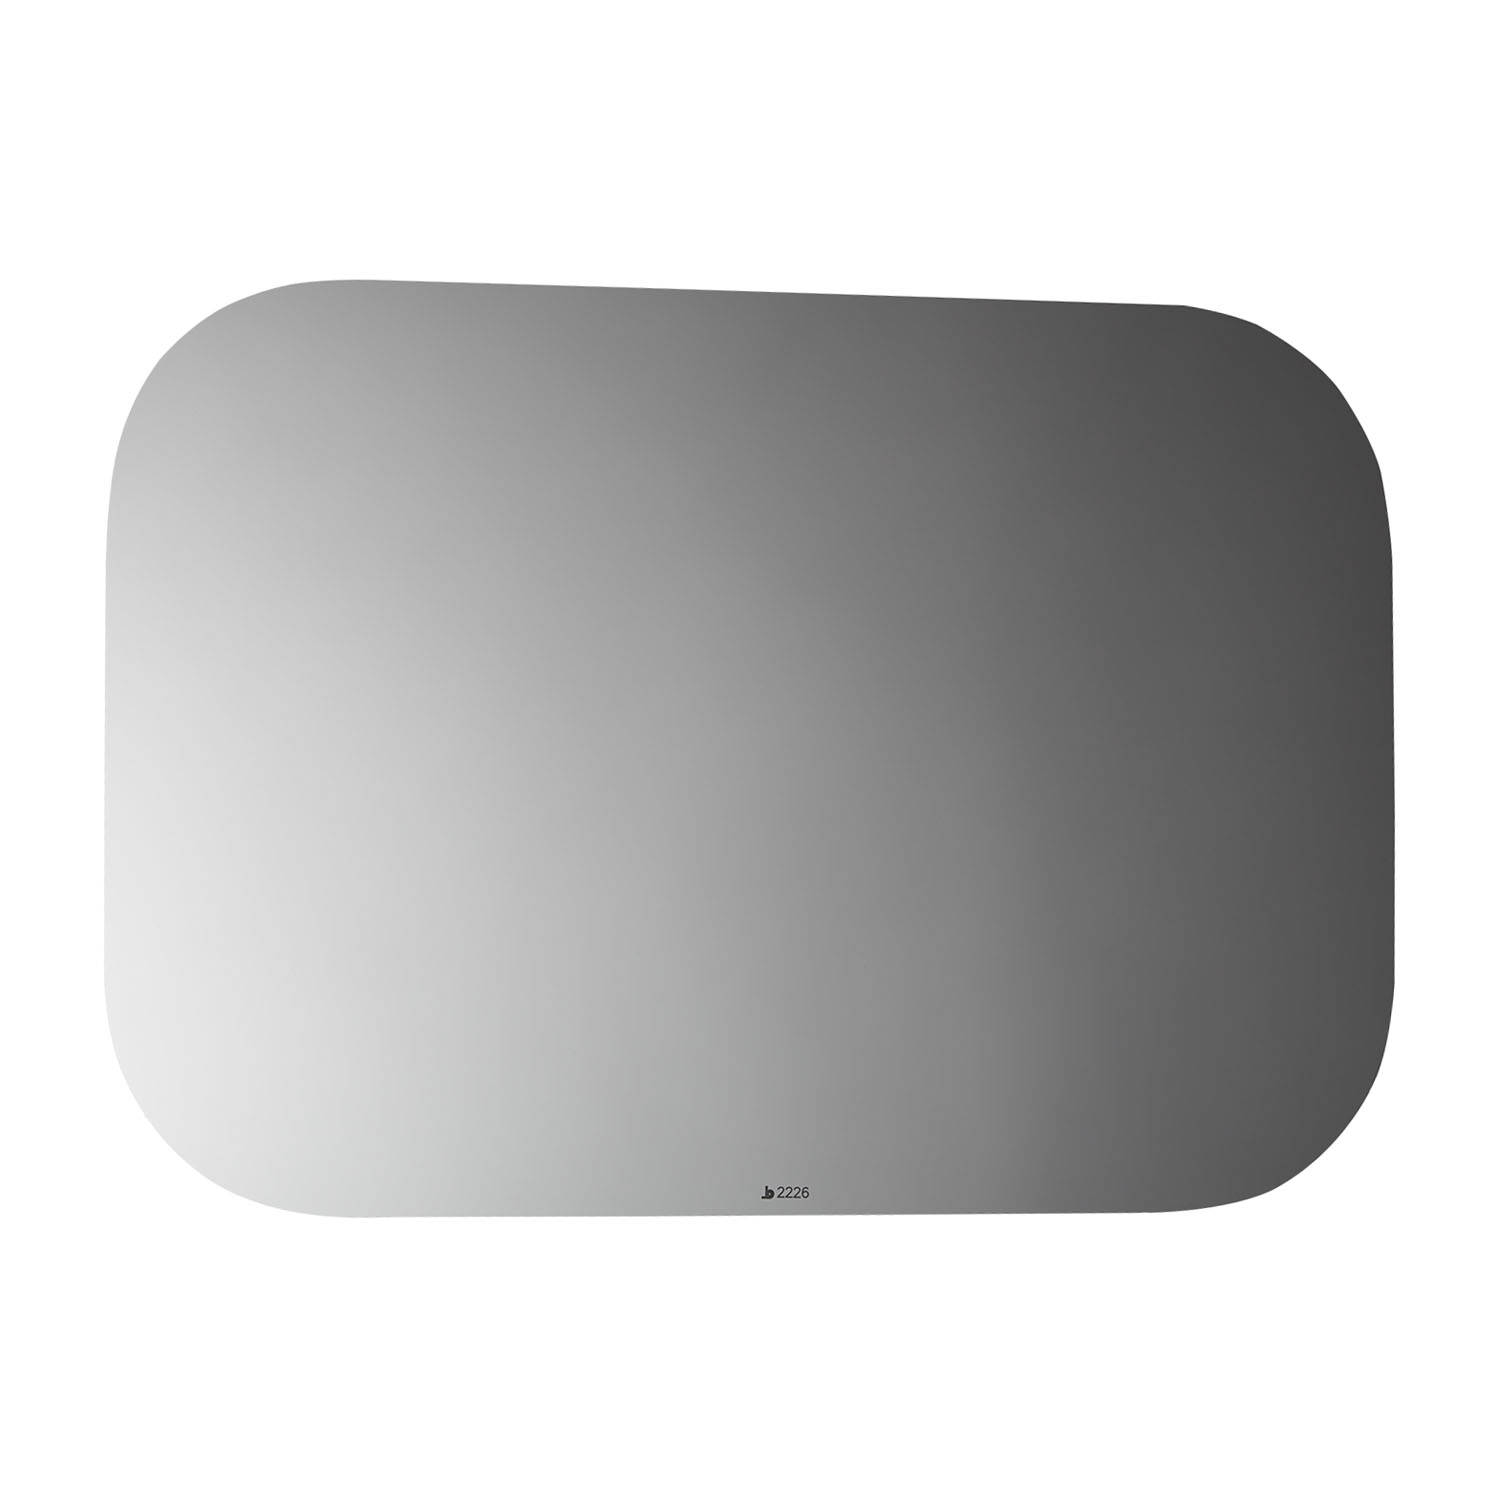 2226 SIDE VIEW MIRROR